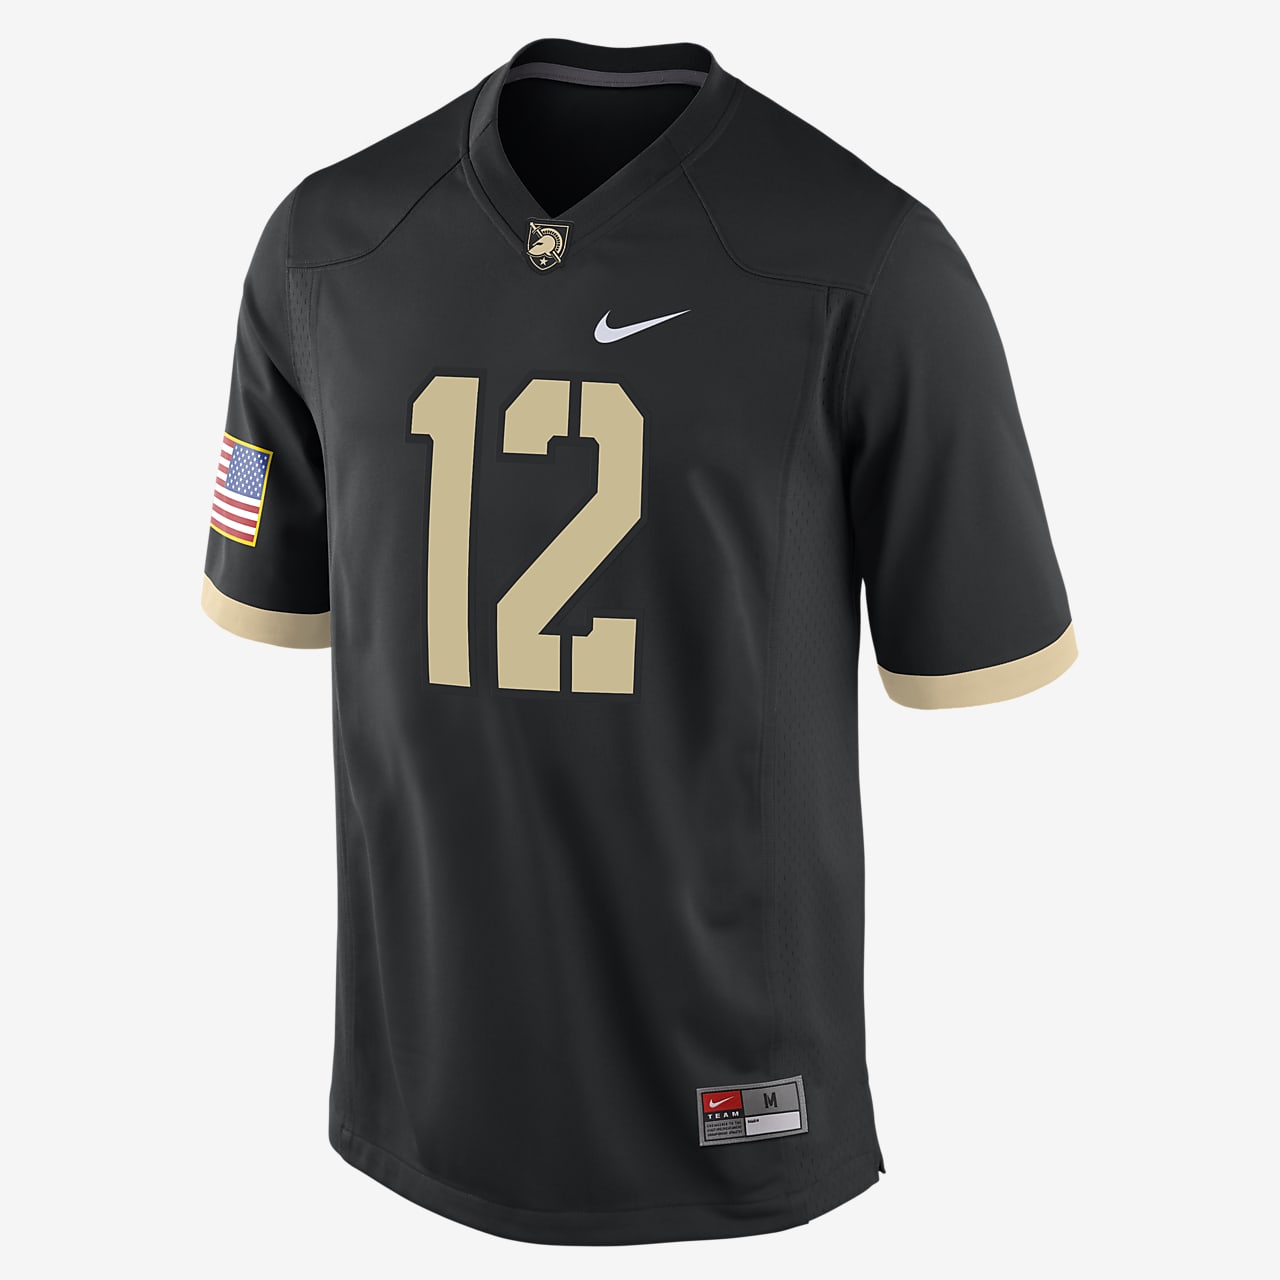 army college jersey